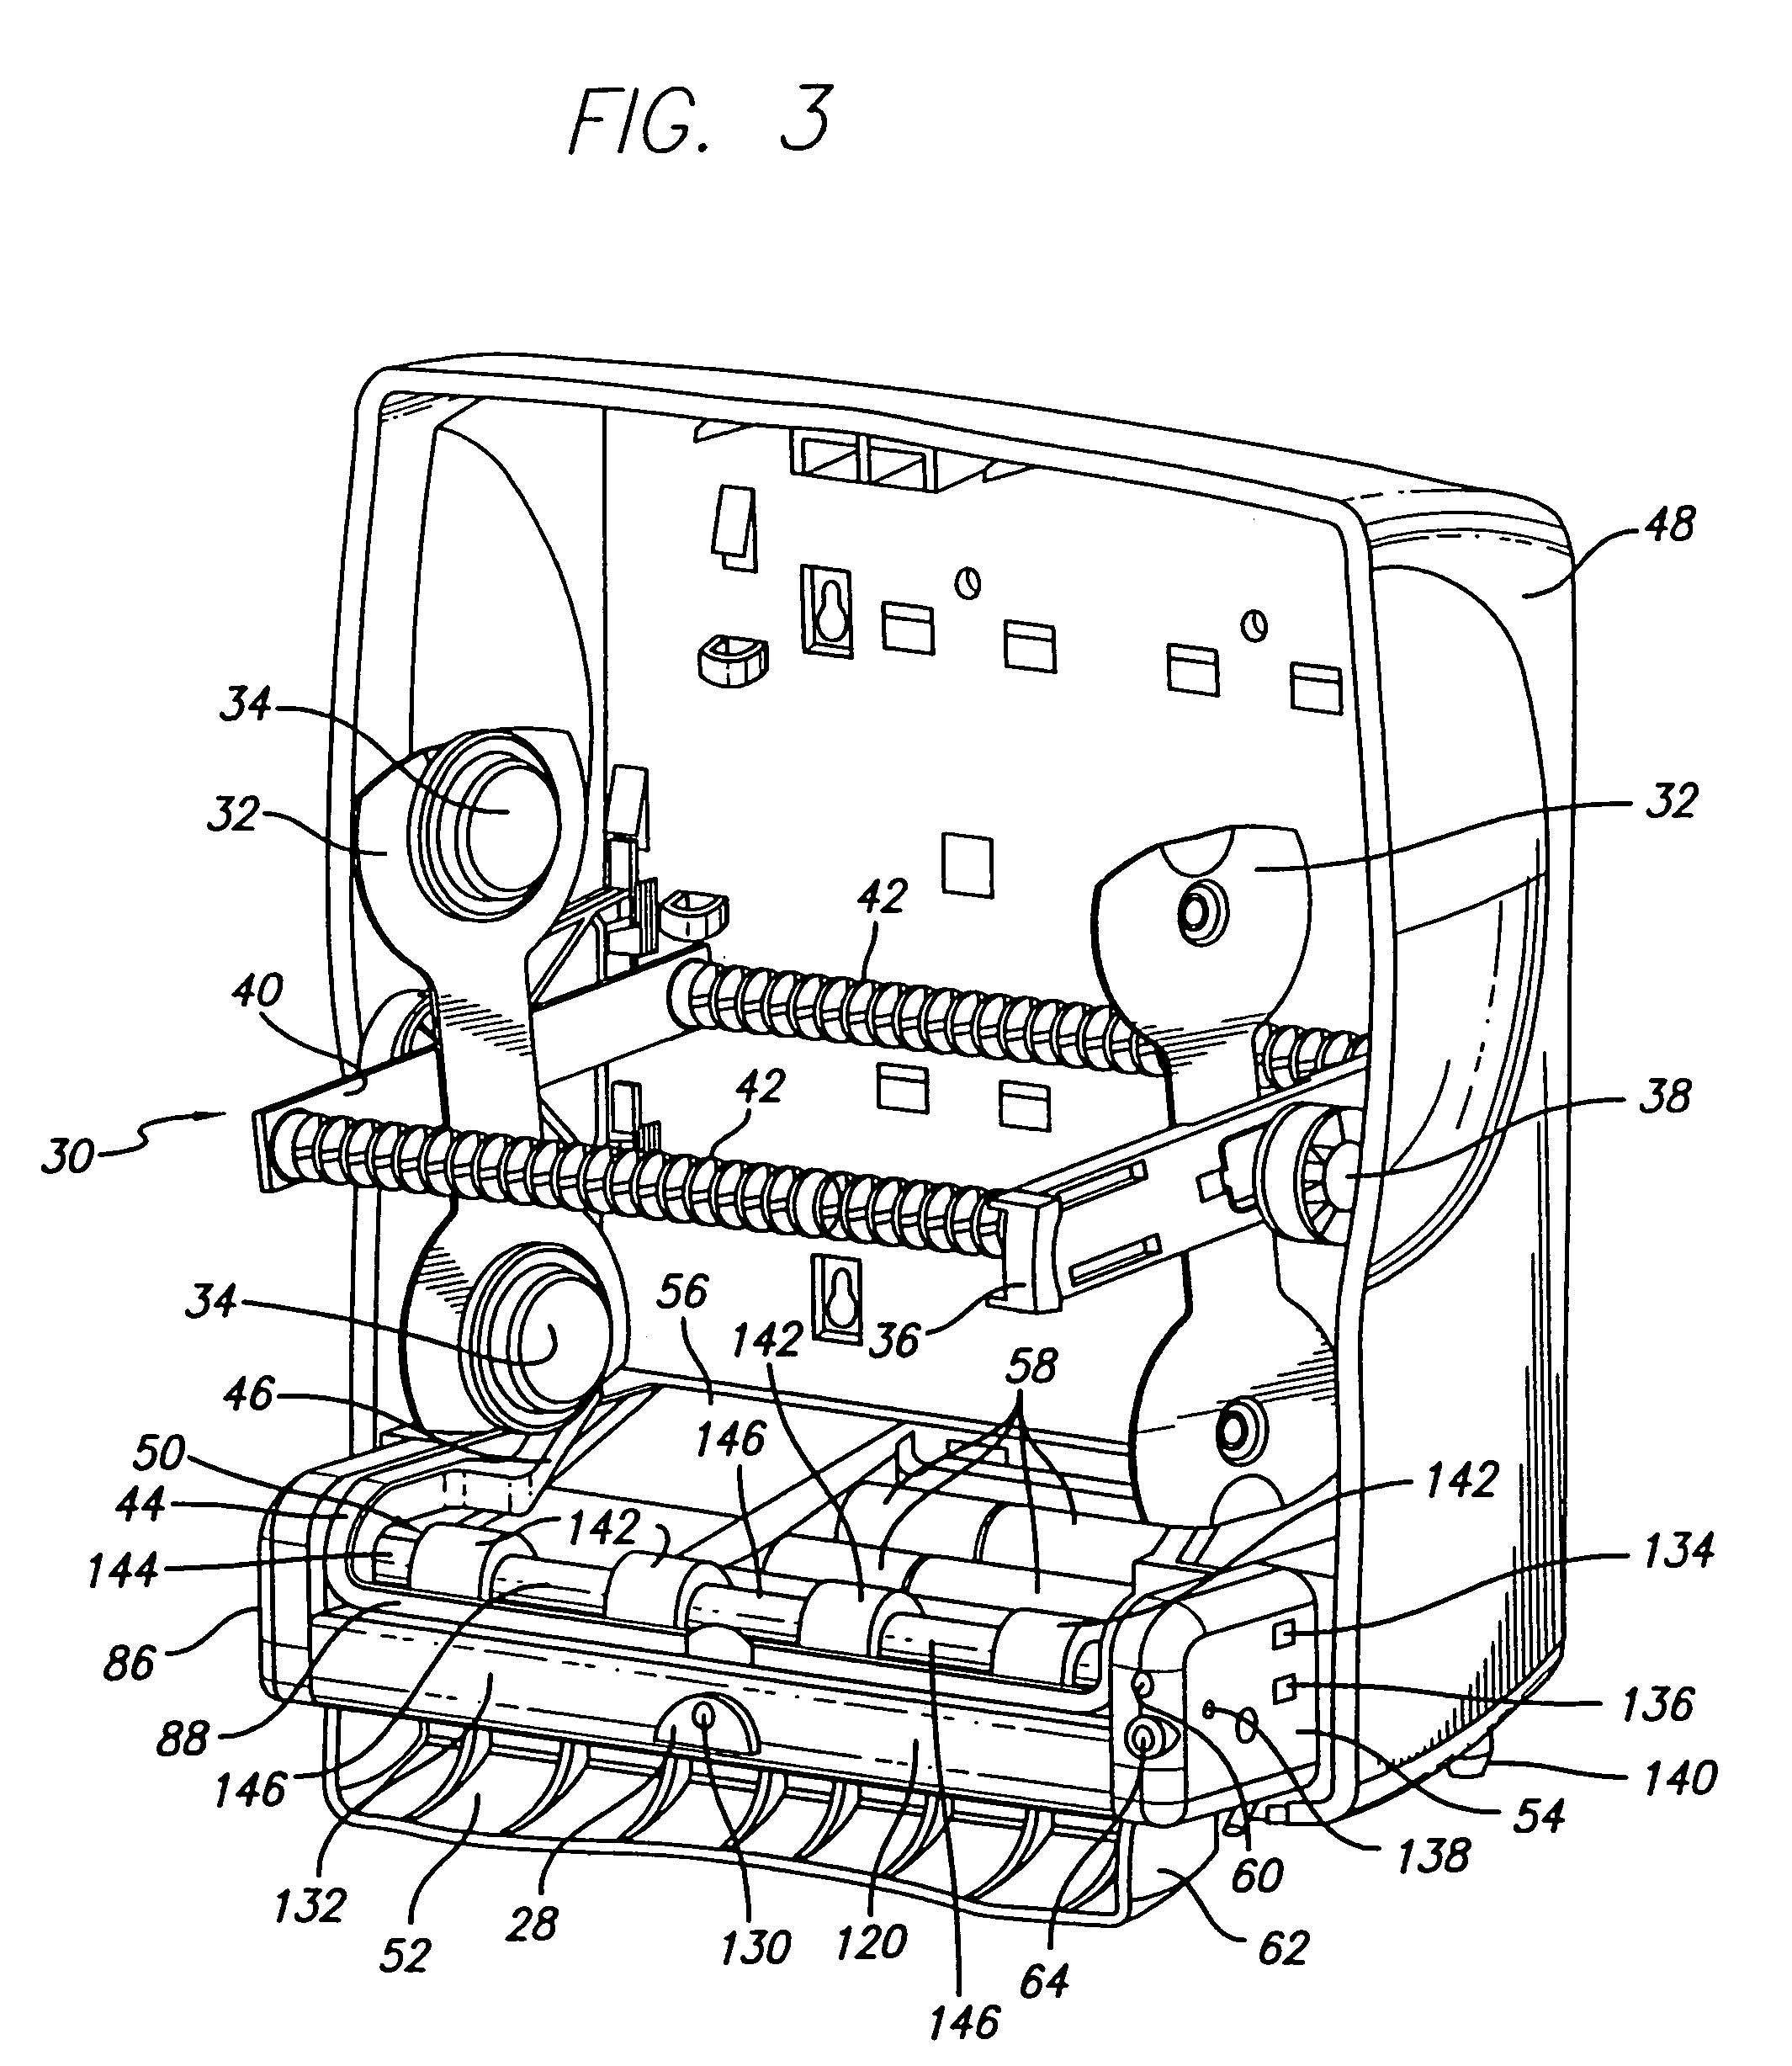 Static build-up control in dispensing system